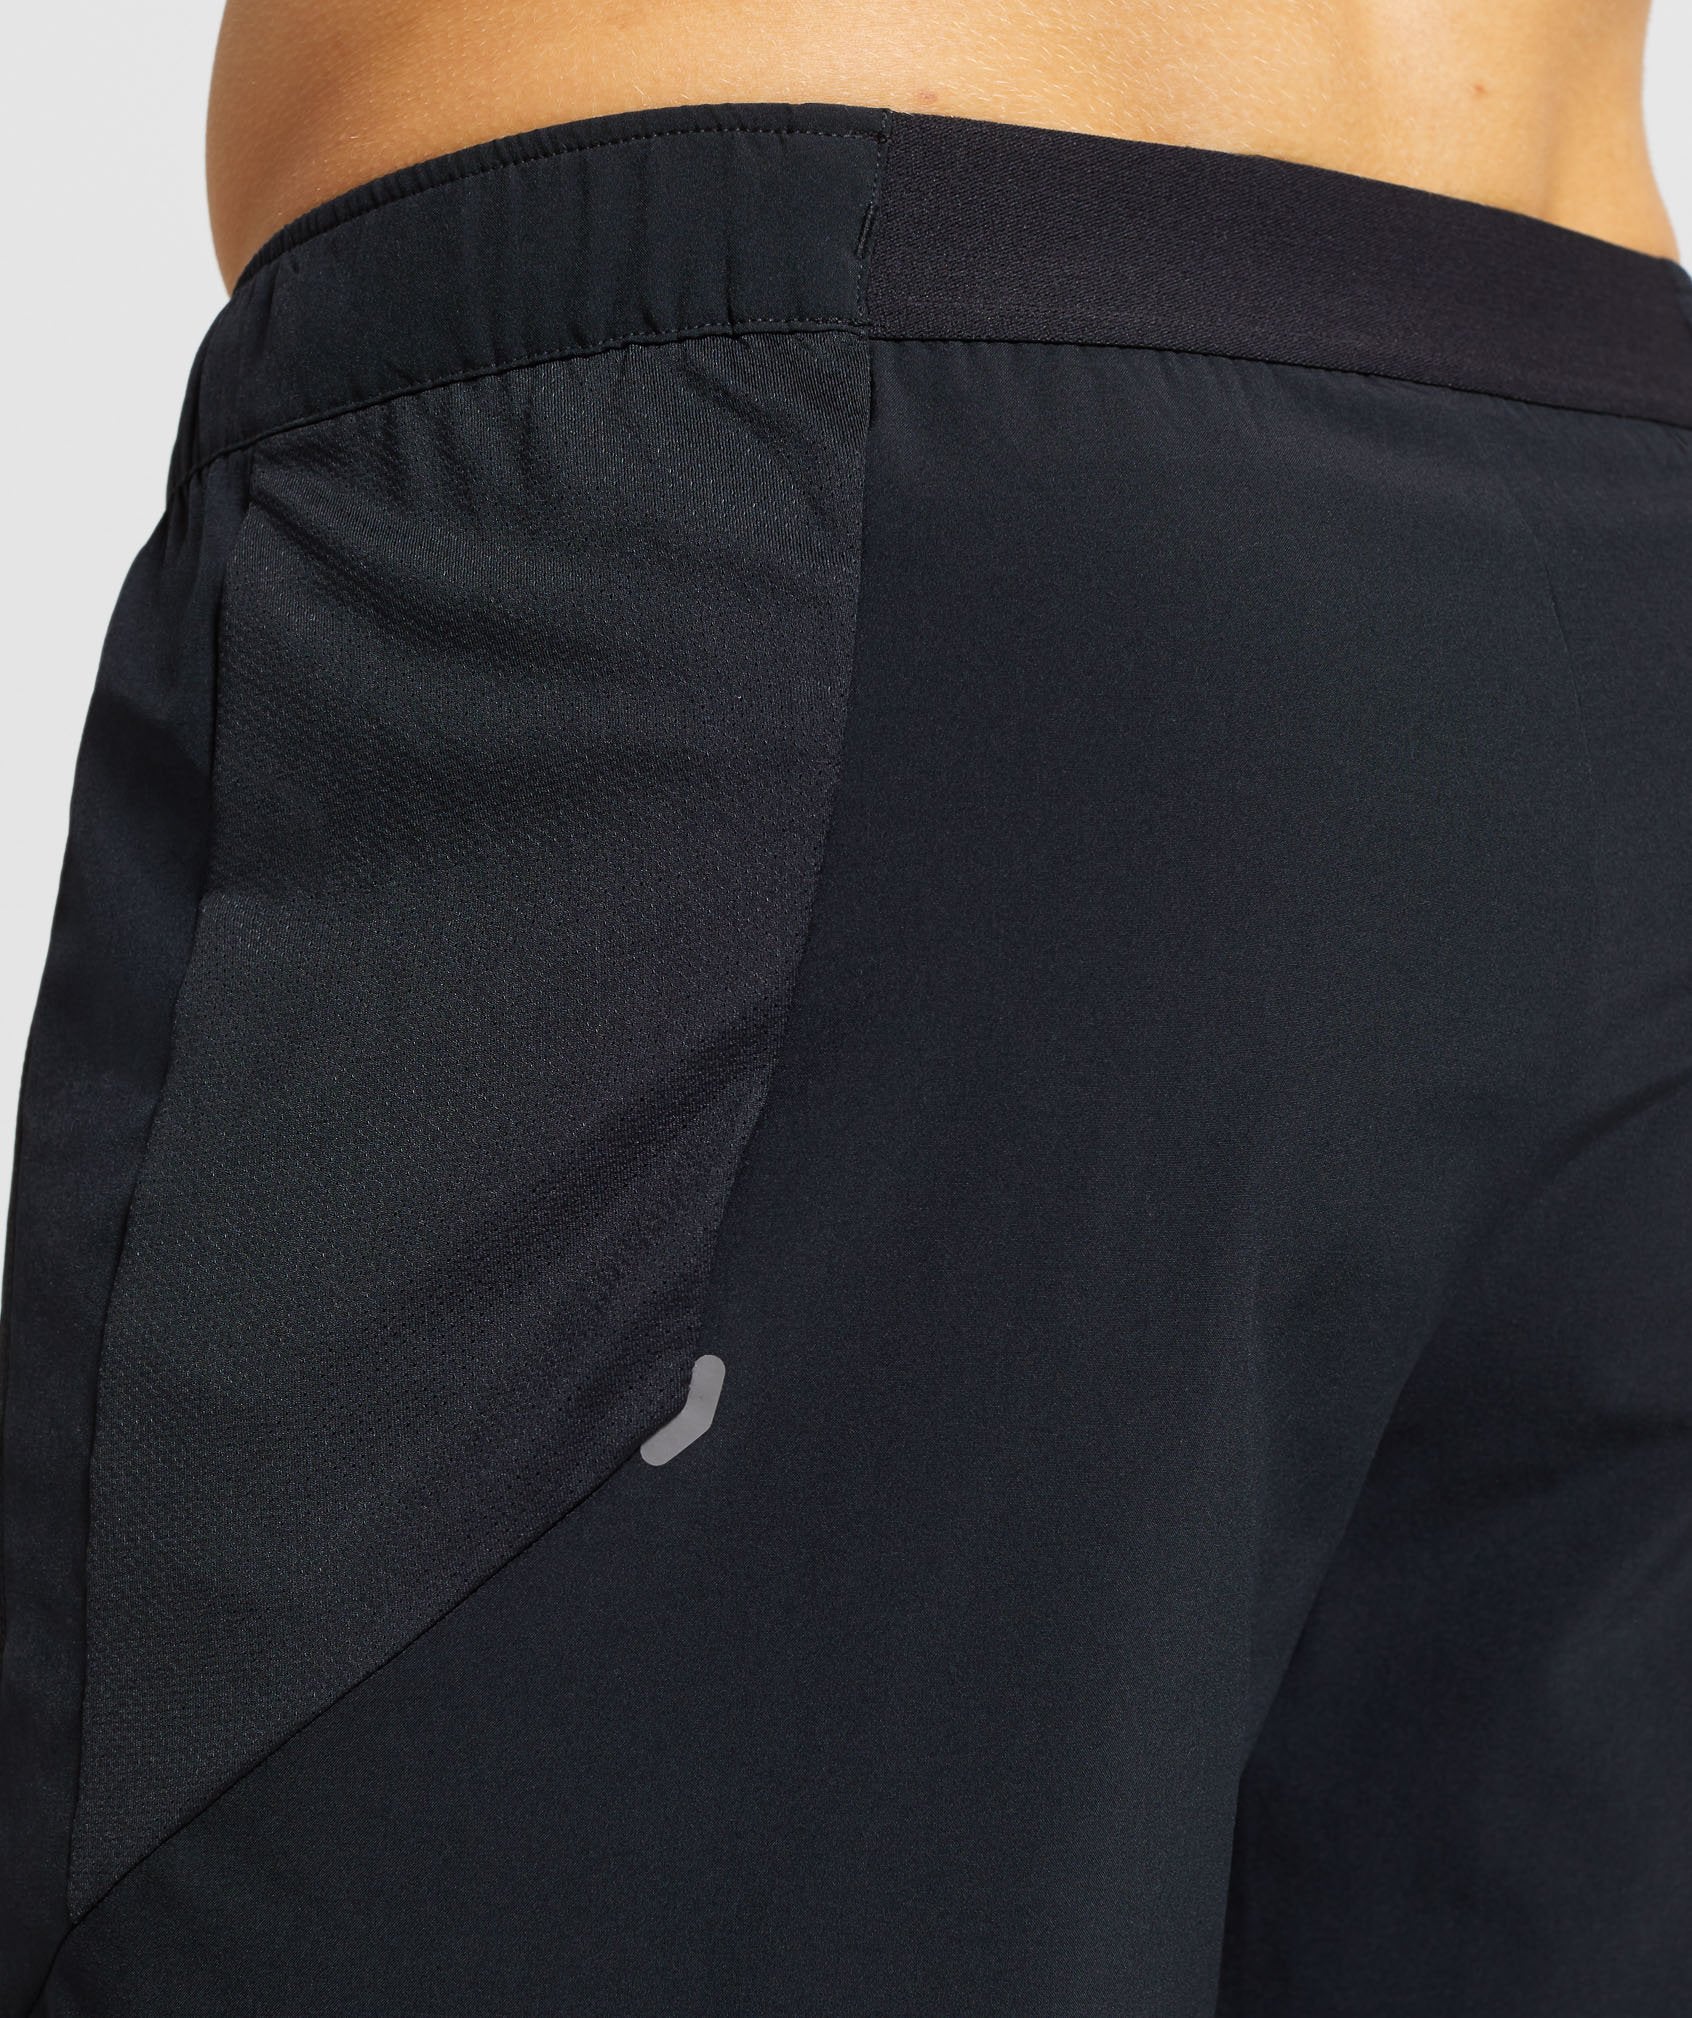 Element Hiit 9" Shorts in Black - view 6